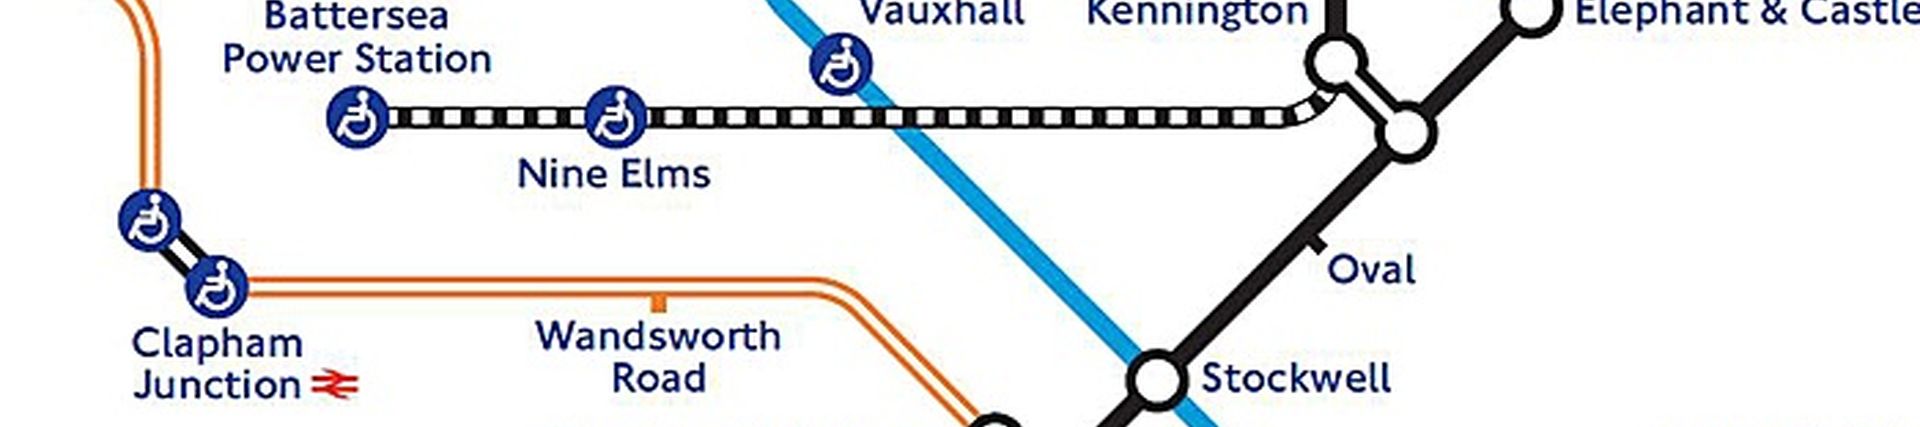 The route of the Northern line extension, built between 2017 and 2021 